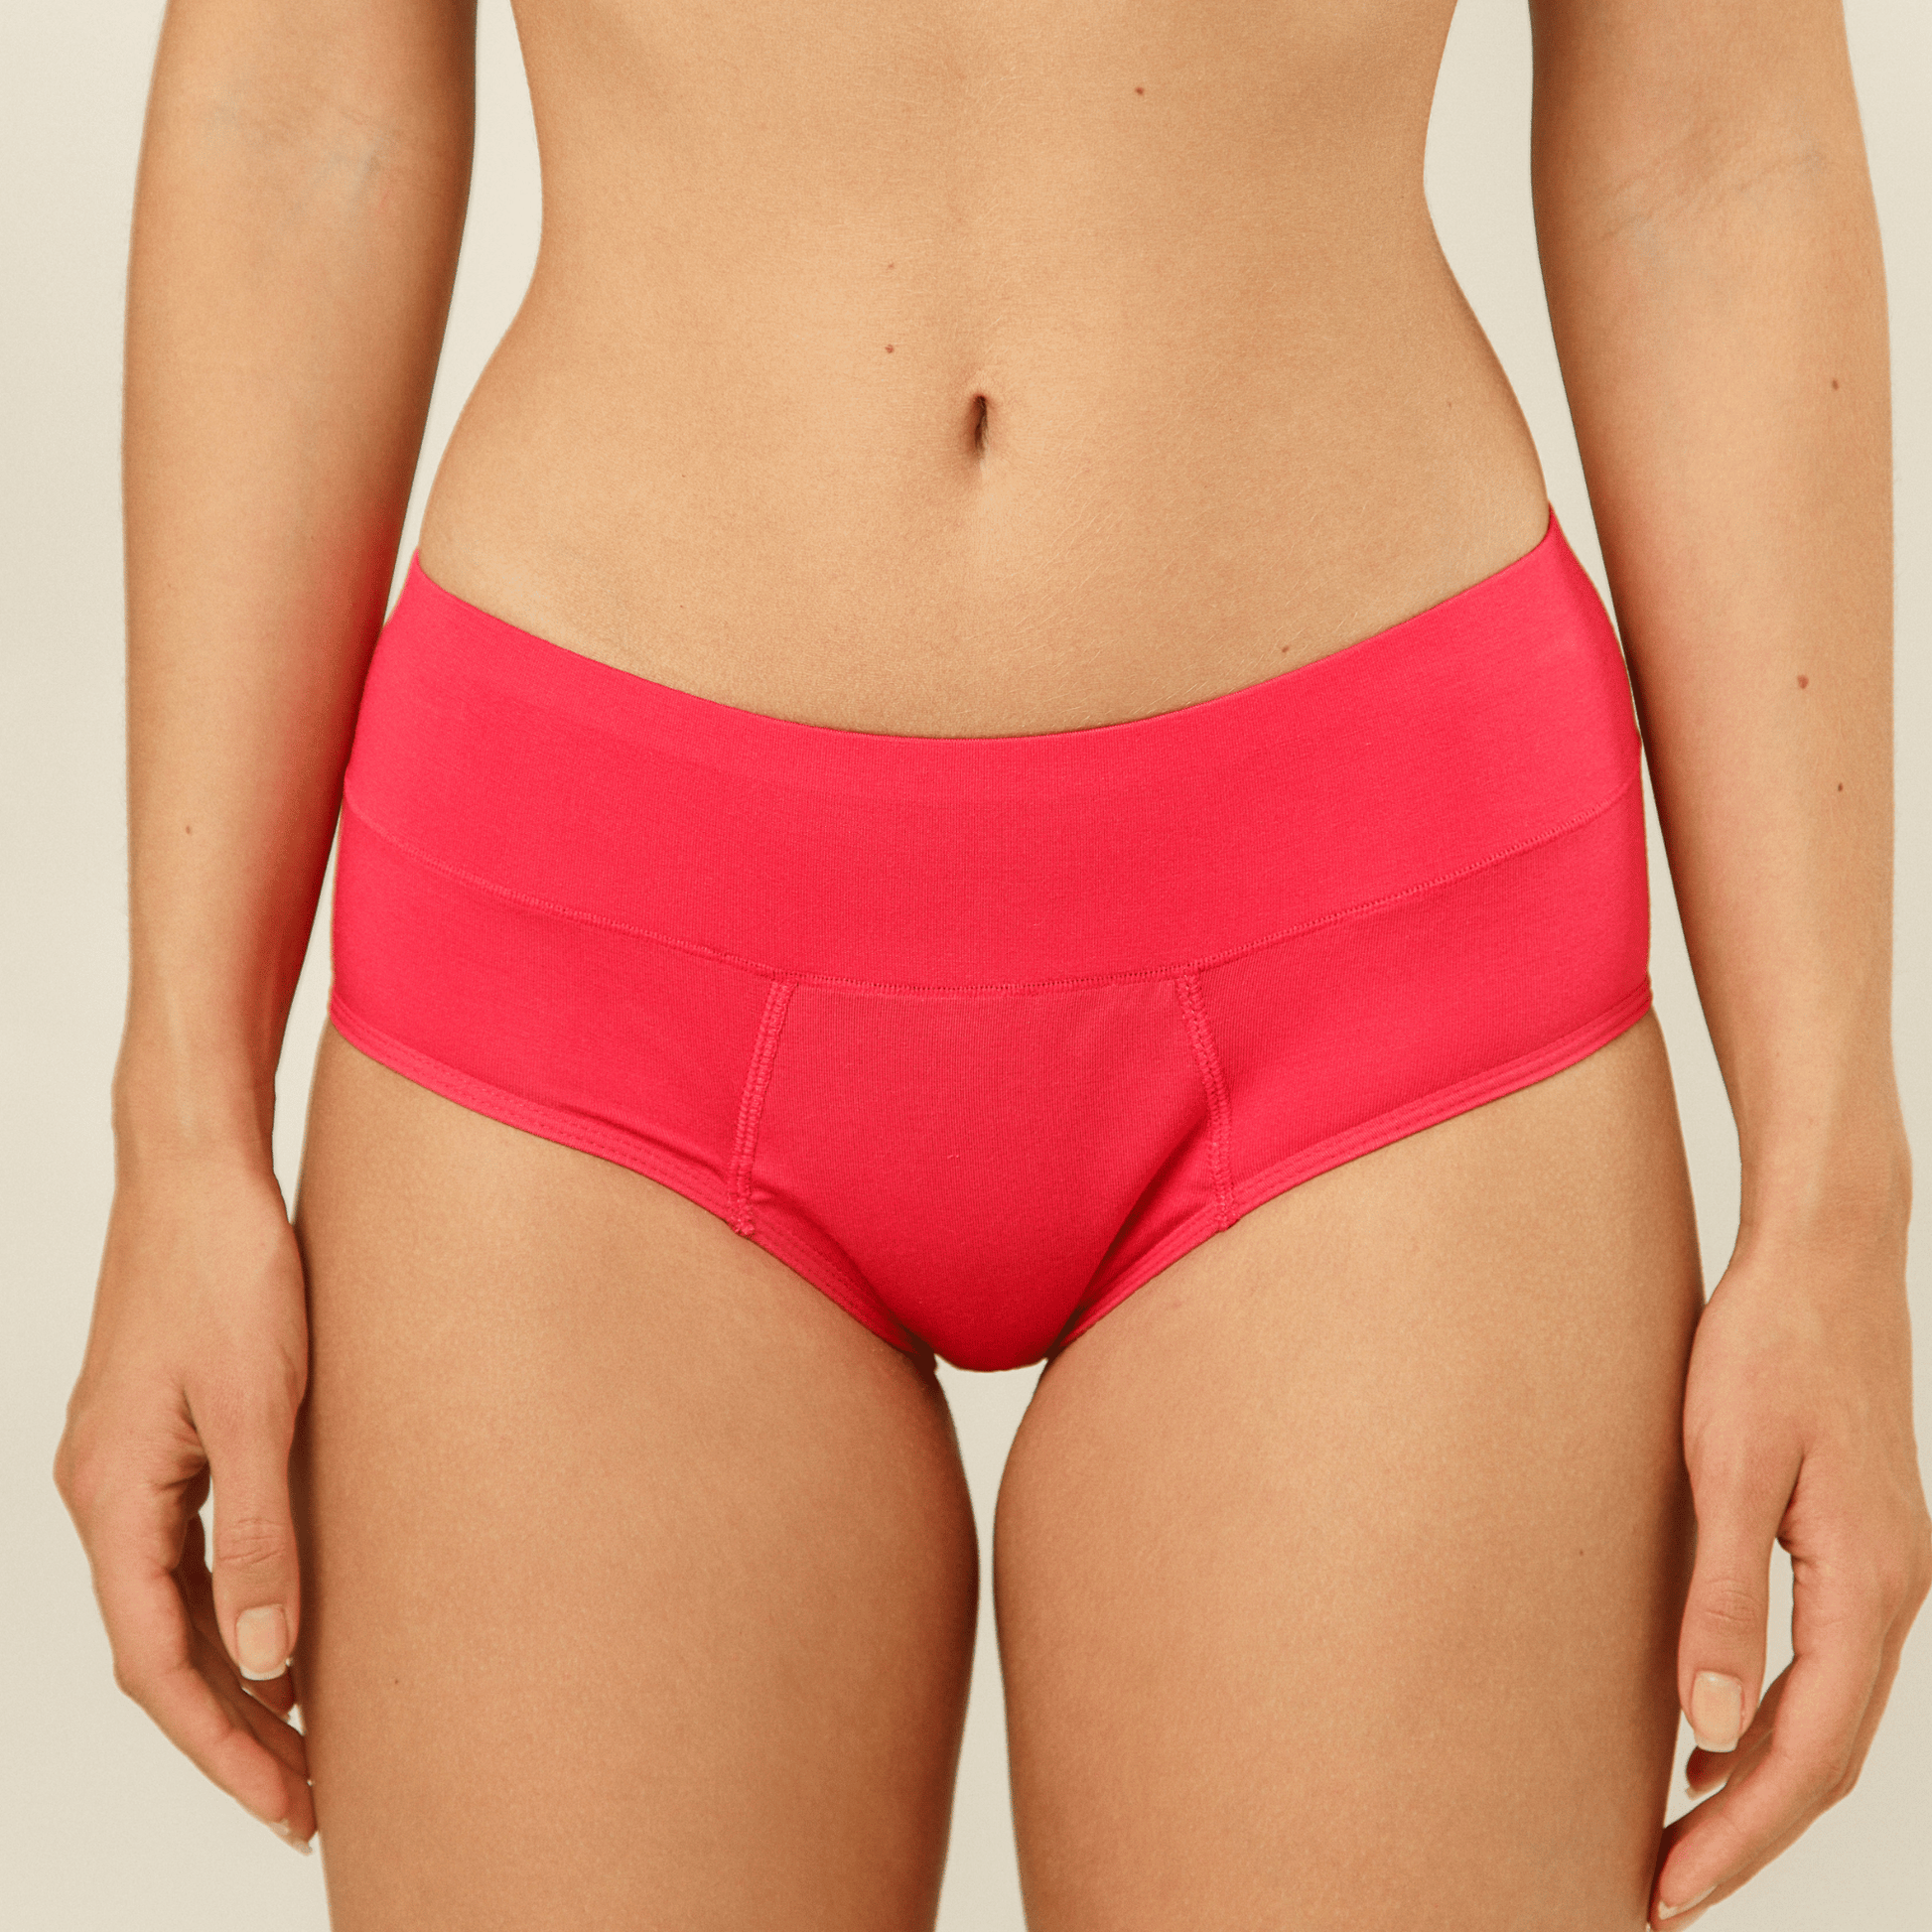 Heavy Flow Period Panties | Boxer Fit | Prevents Front, Back & Inner Thigh  Stains | 3 Pack